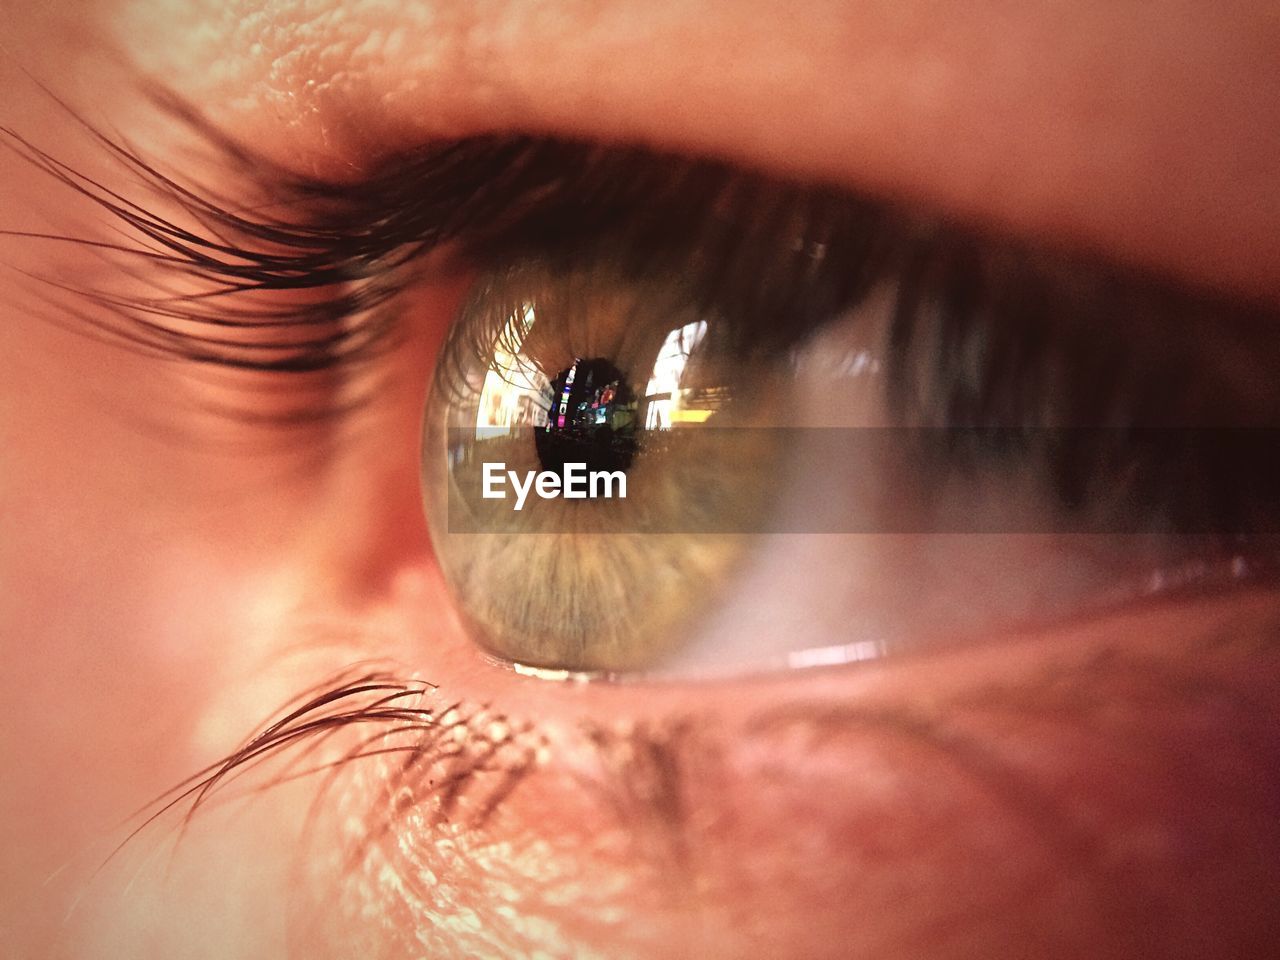 EXTREME CLOSE-UP OF WOMAN EYE WITH REFLECTION